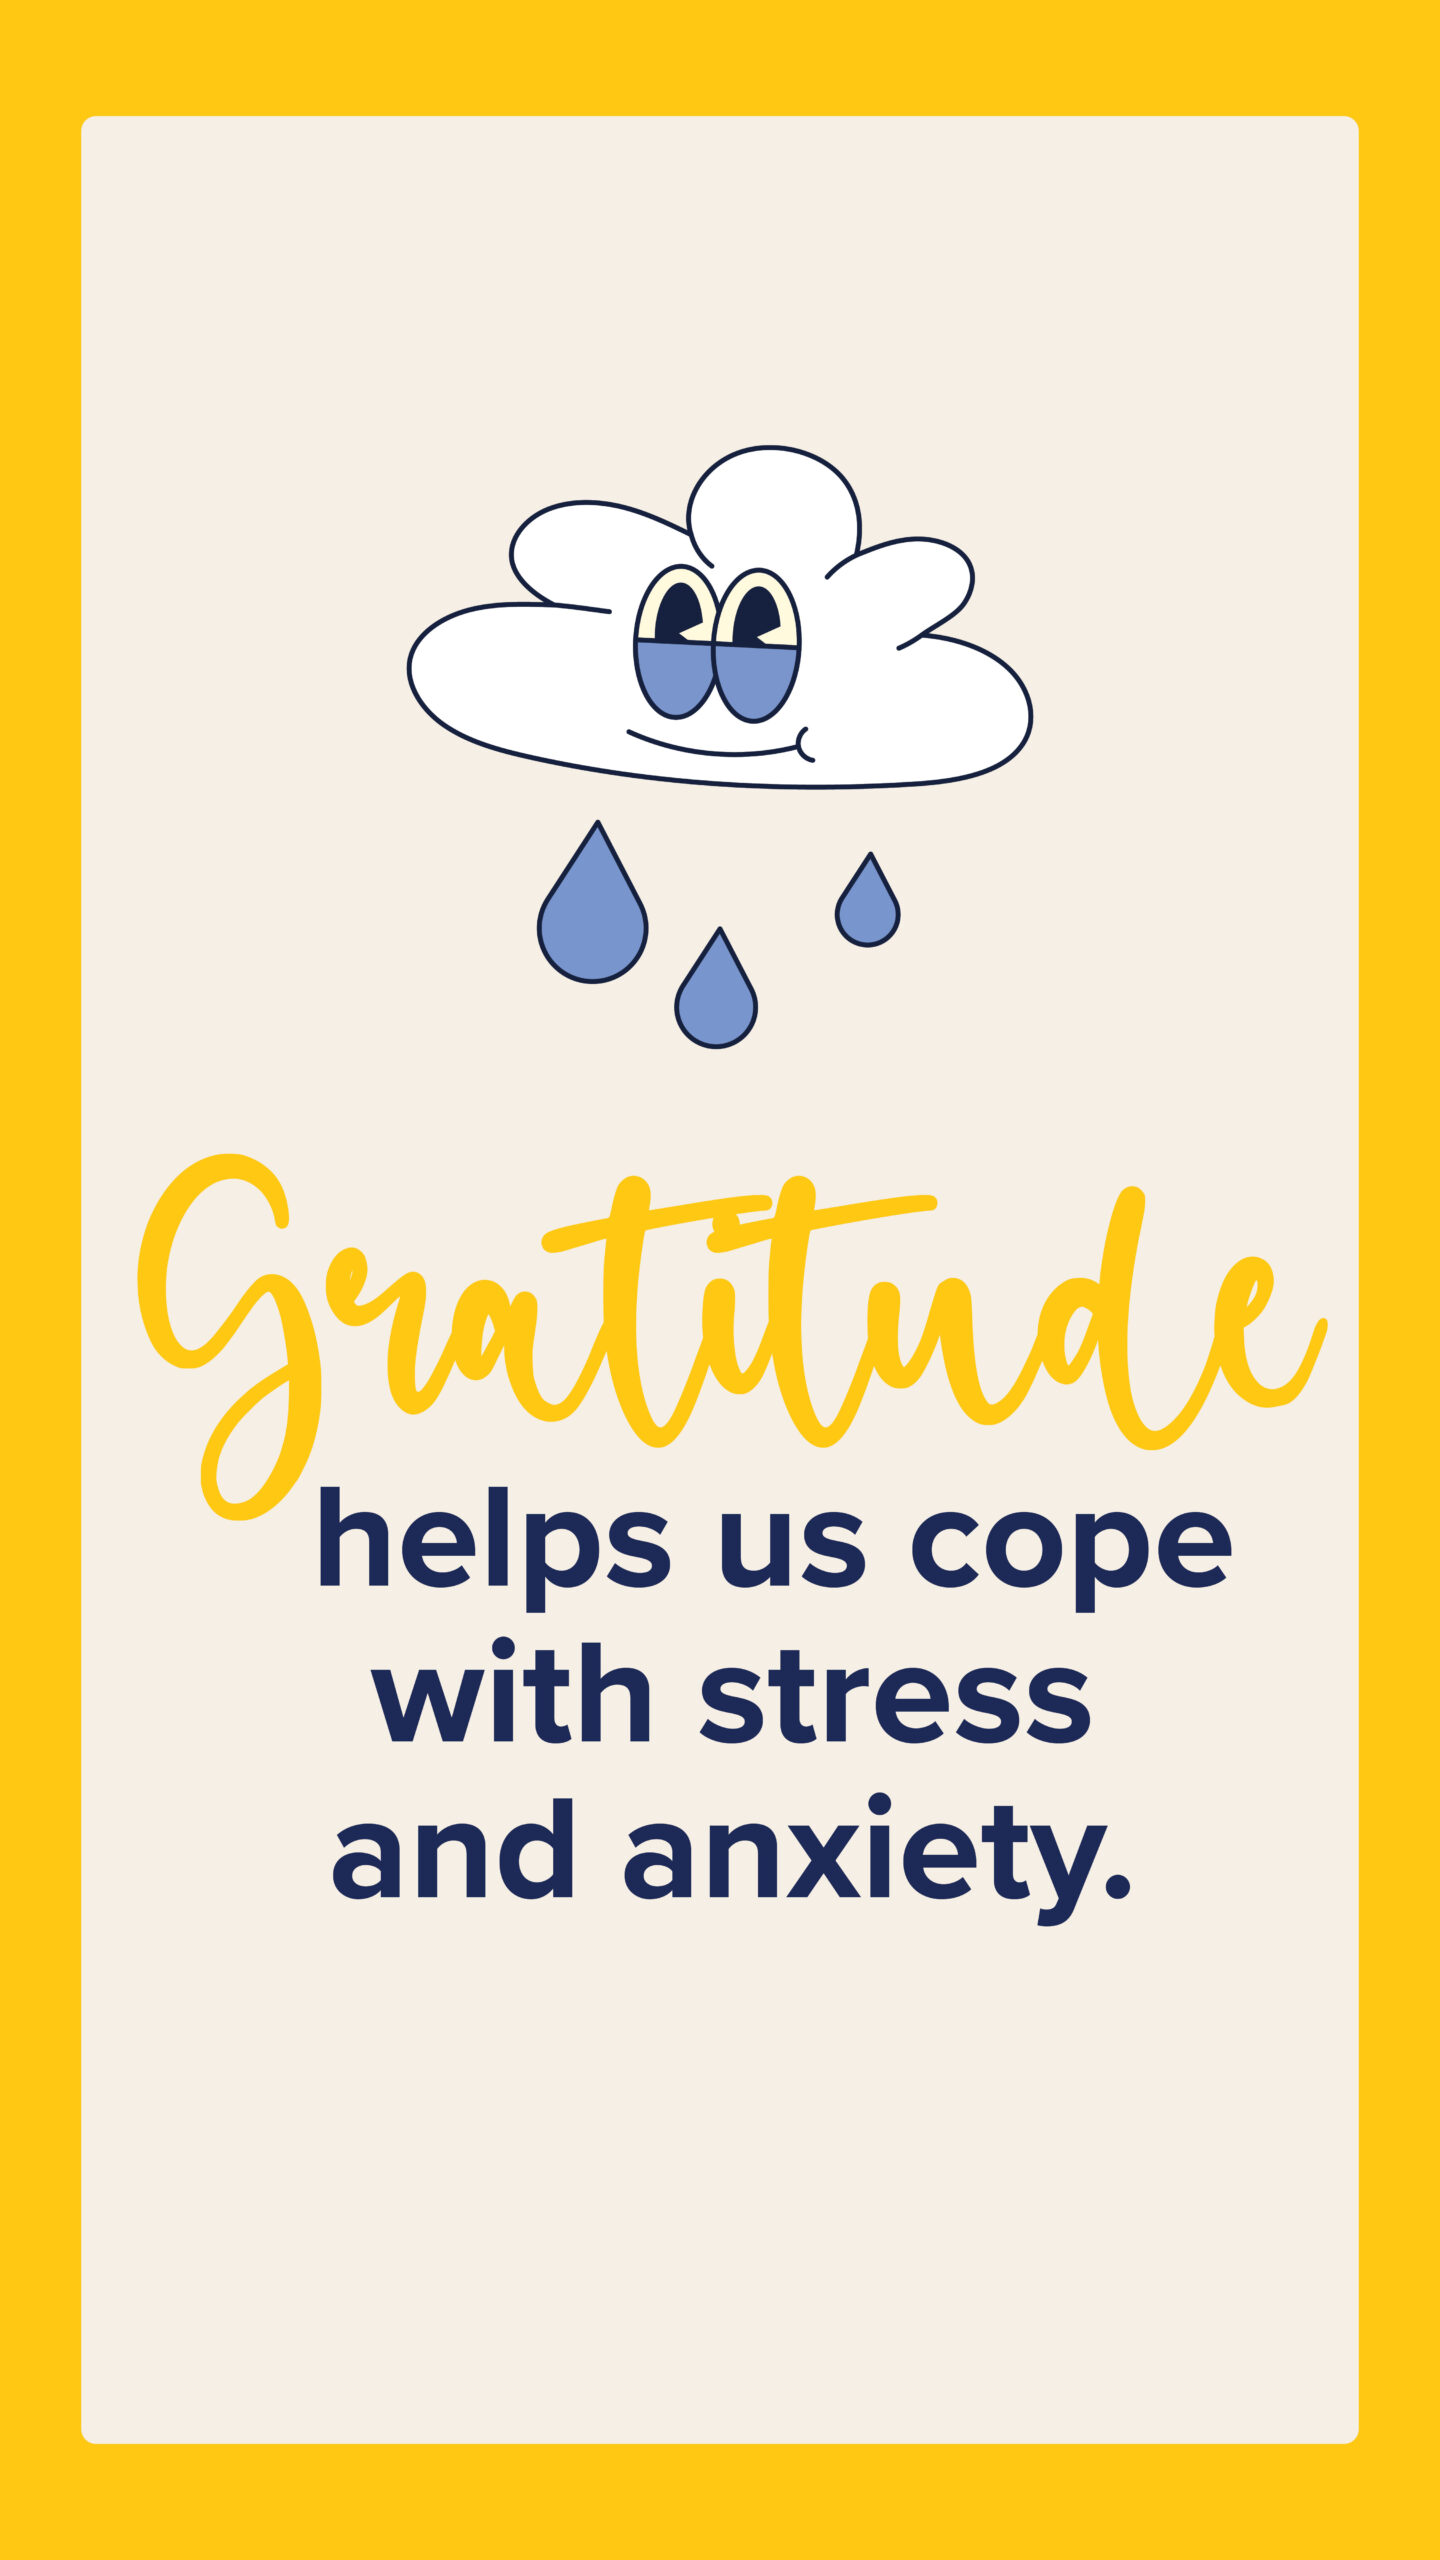 Gratitude helps us cope with stress and anxiety